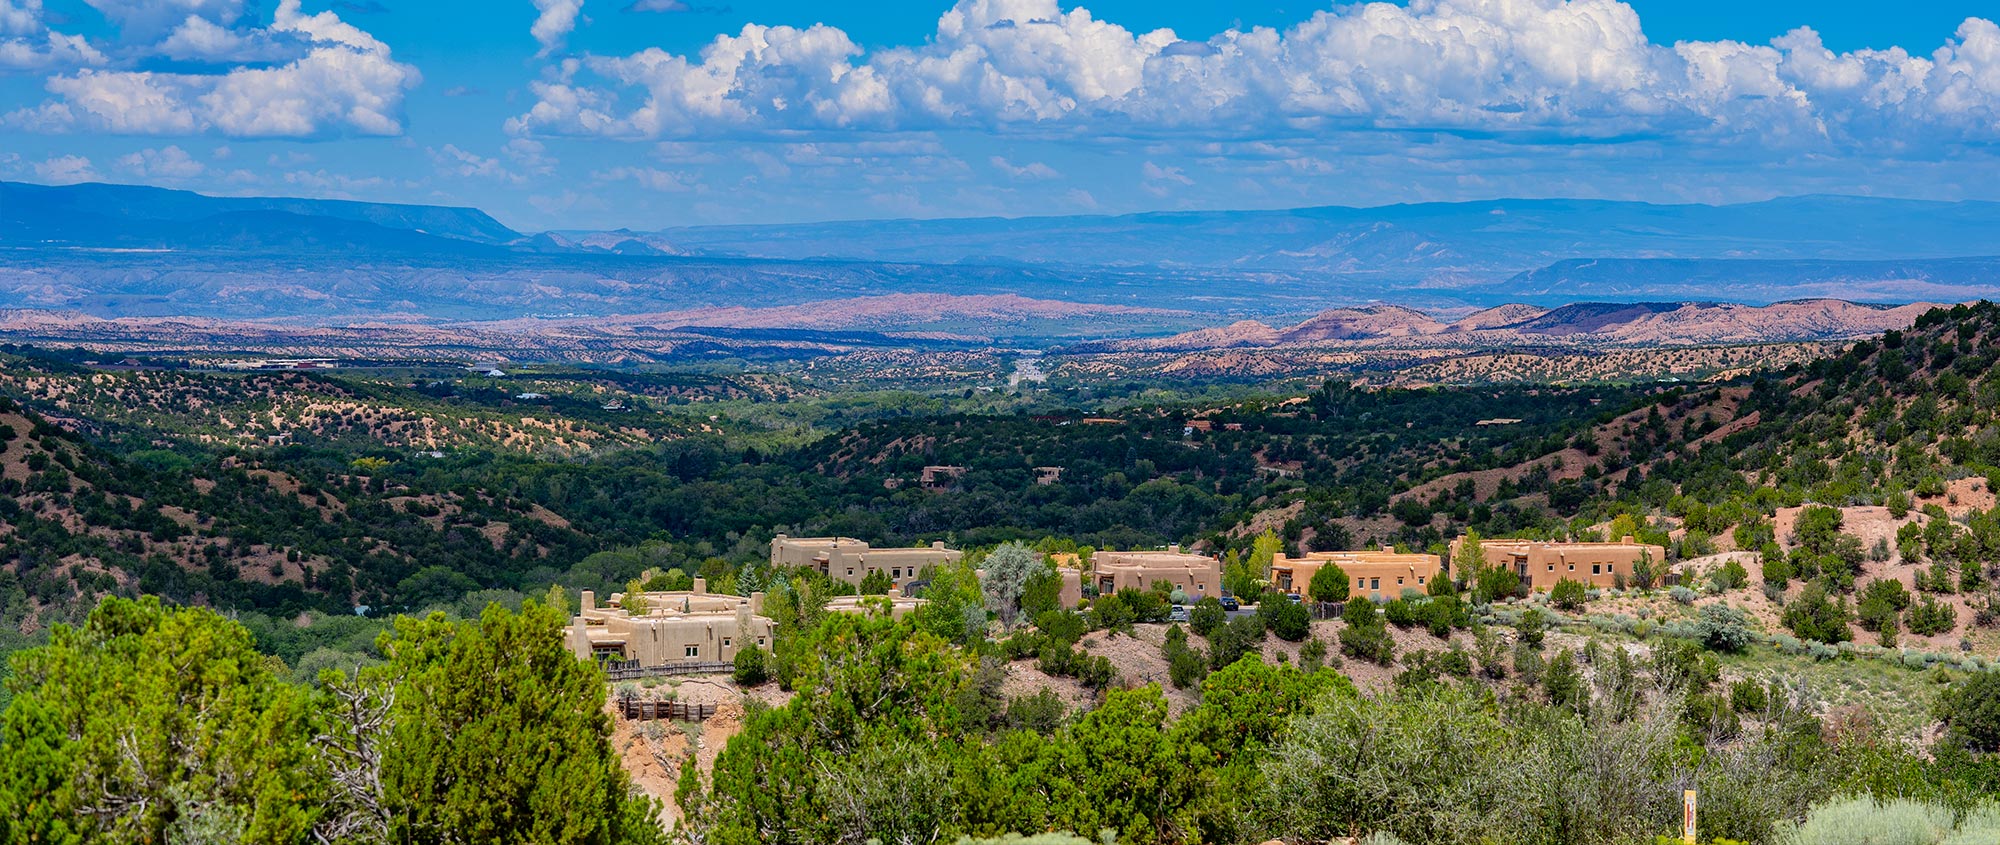 Landscape looking North from Los Alamos, New Mexico.